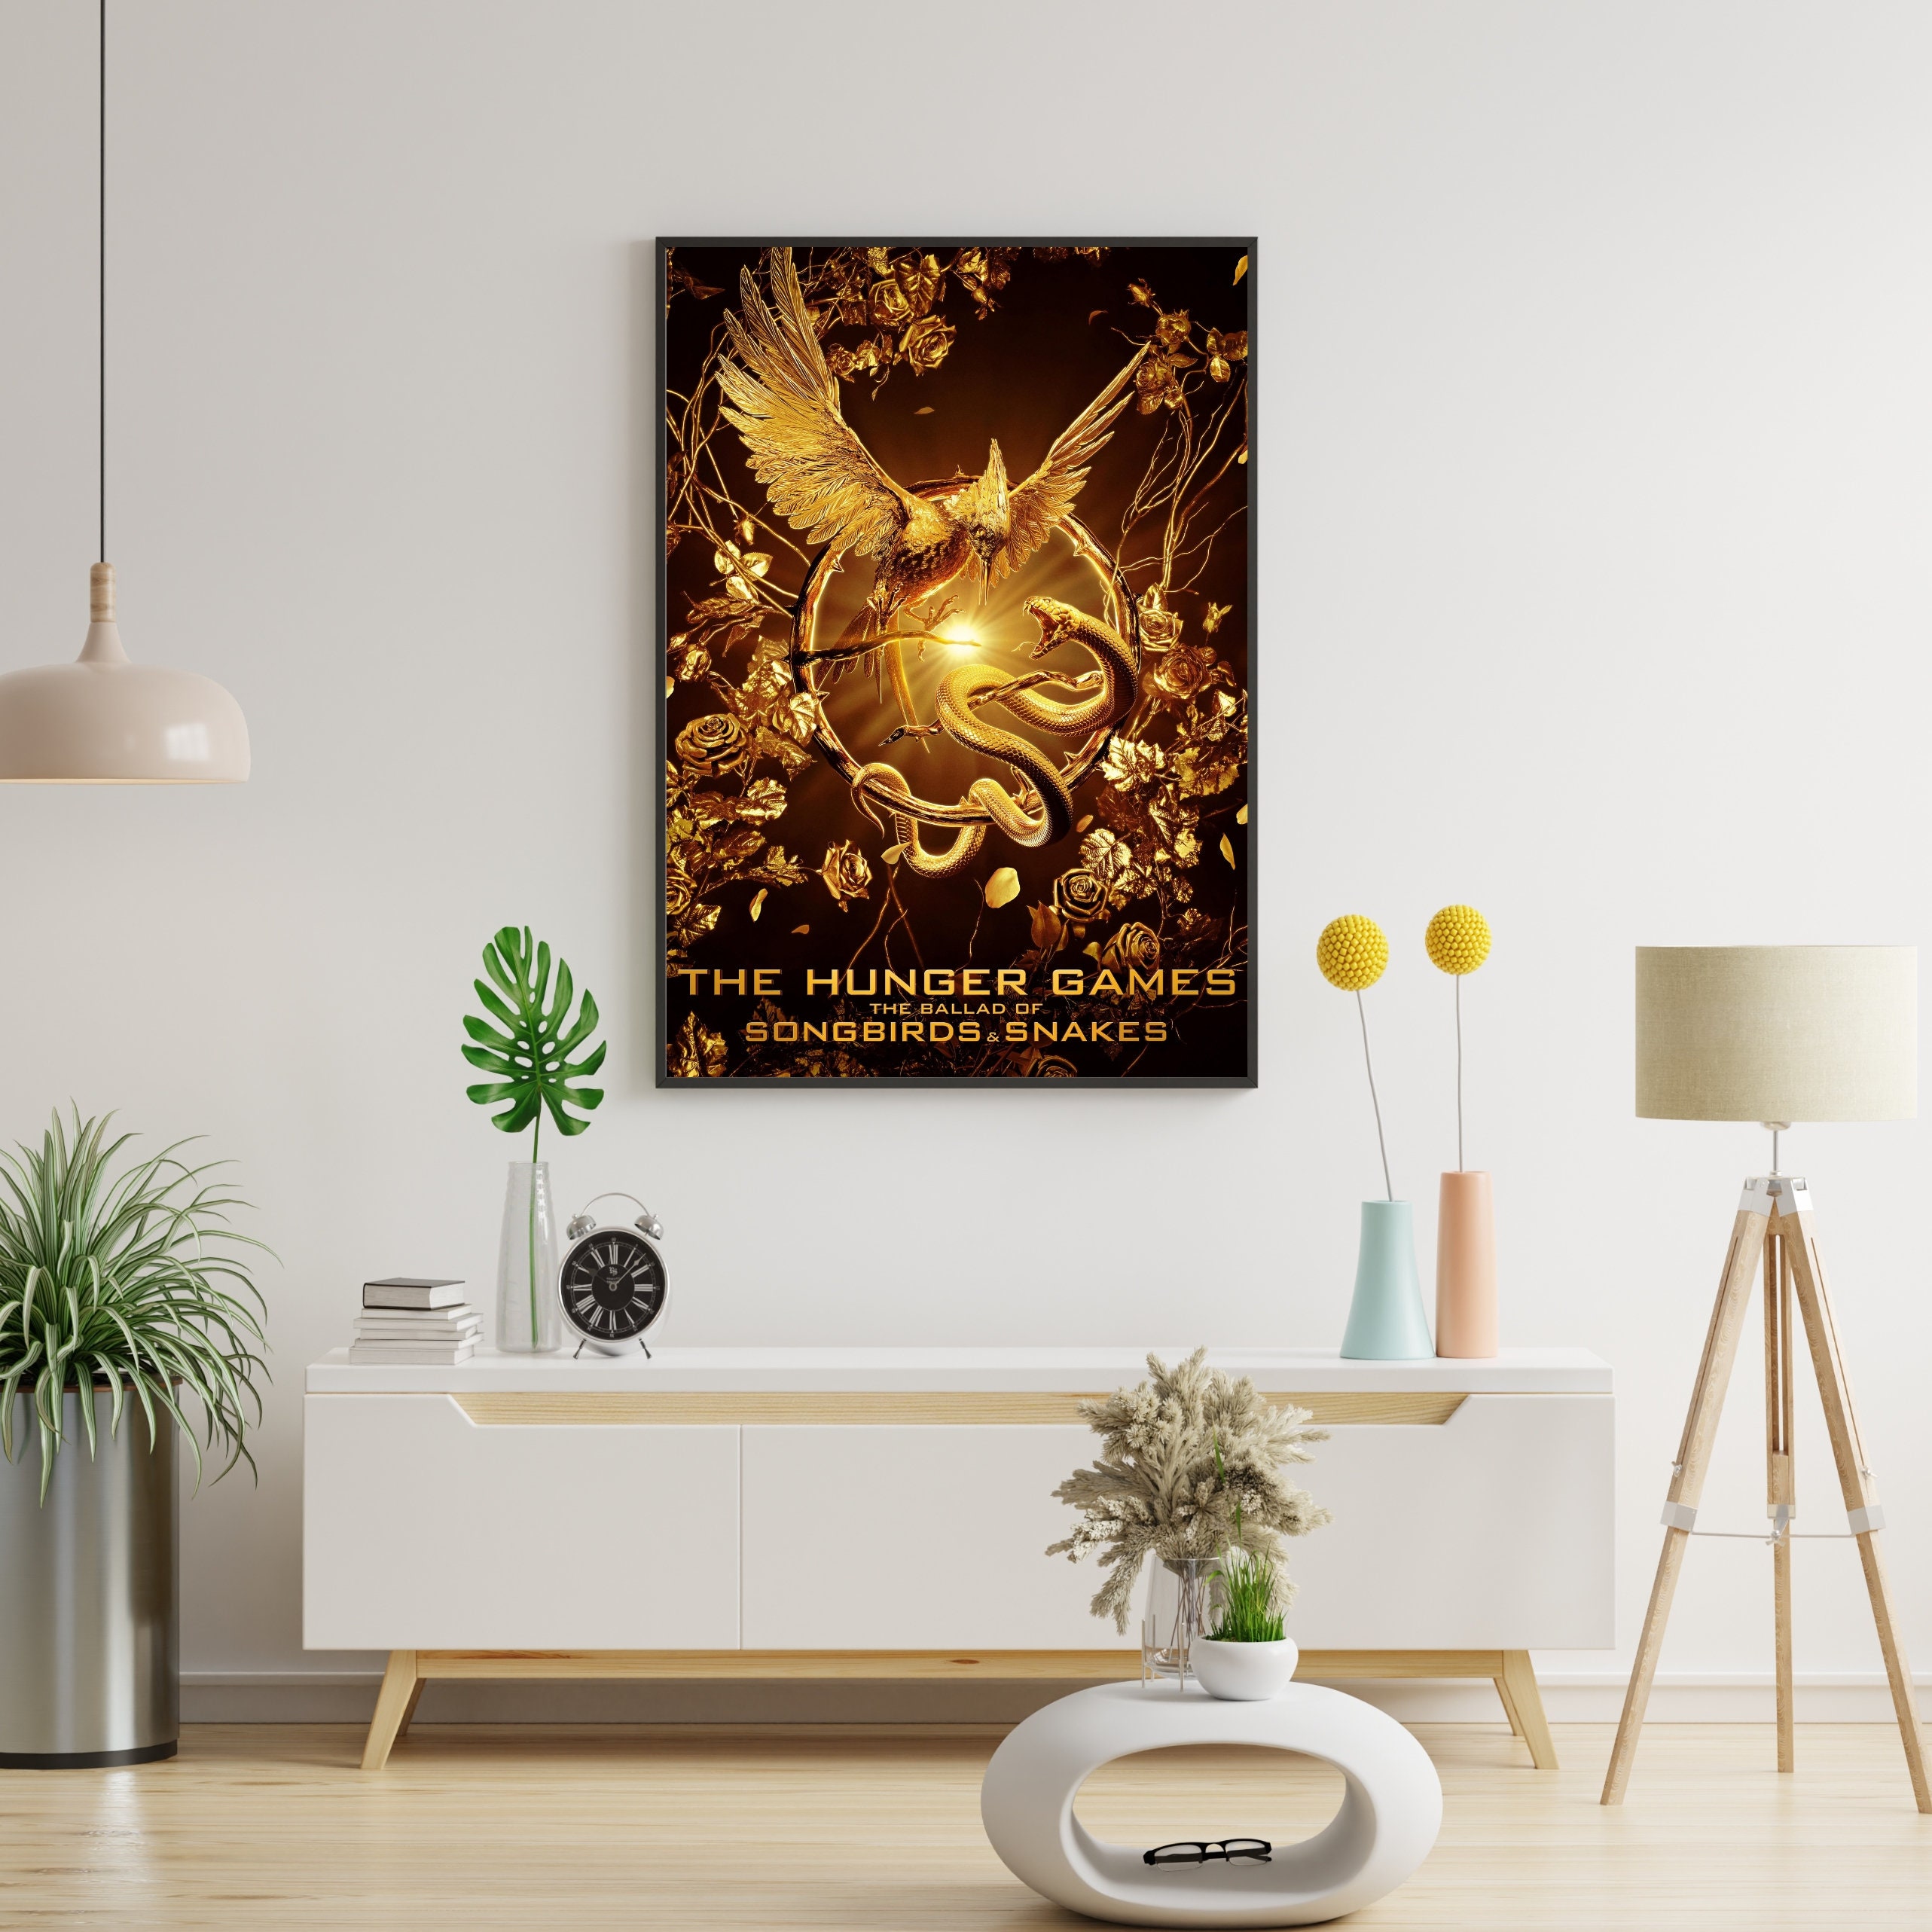 Discover The Hunger Games Poster High Quality The Hunger Games Poster The Hunger Games Wall Art The Hunger Games